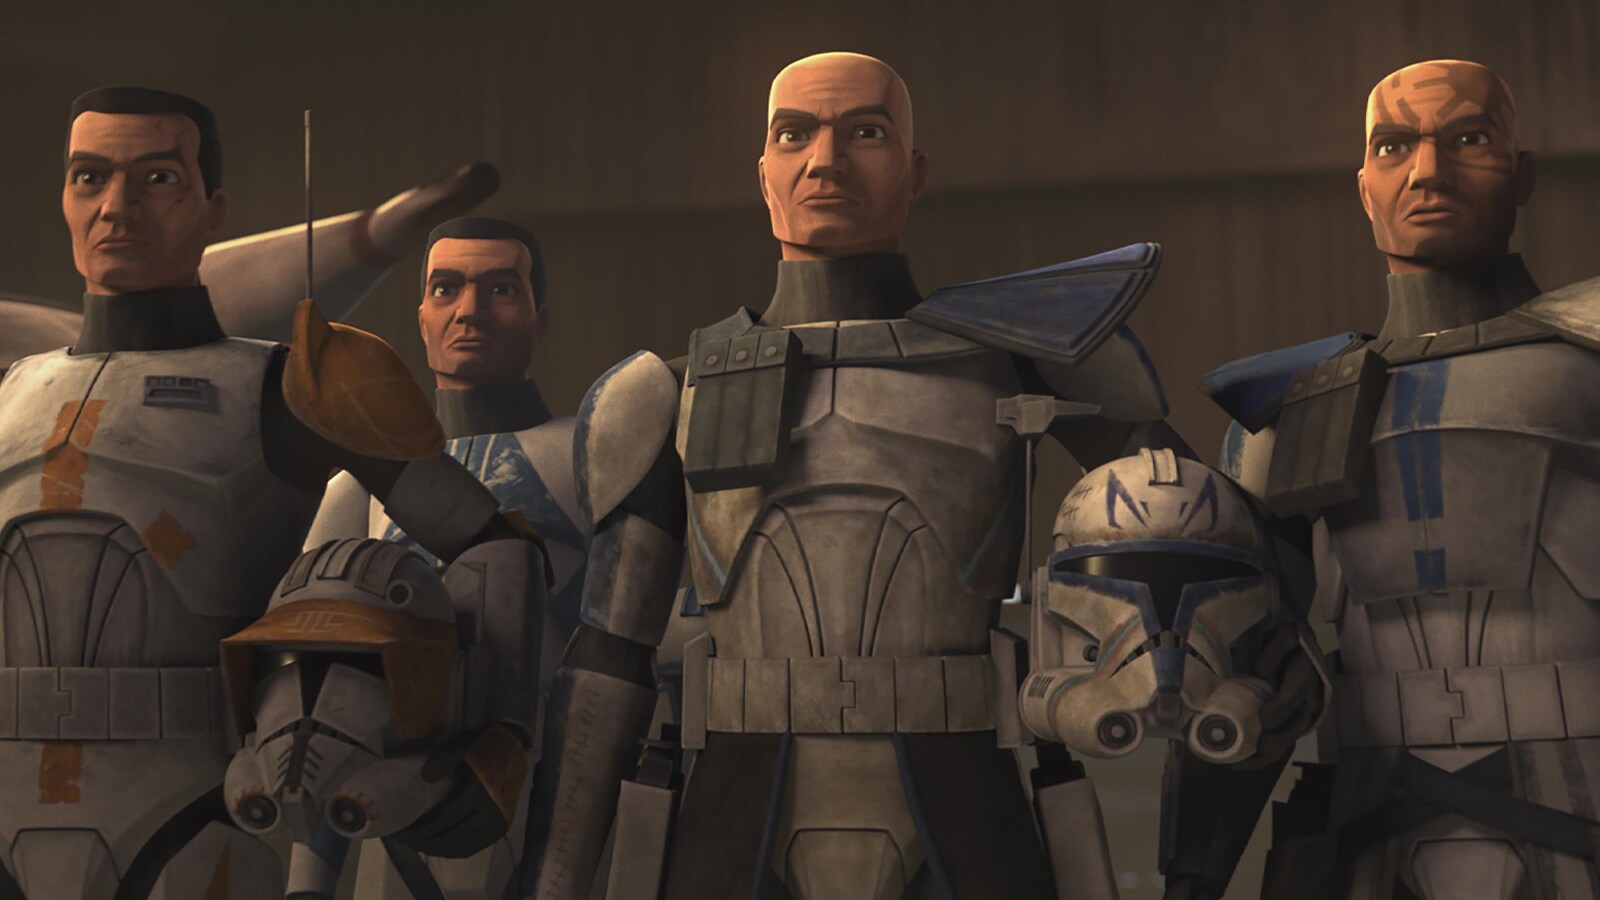 Quiz: How Well Do You Know Your Clones?